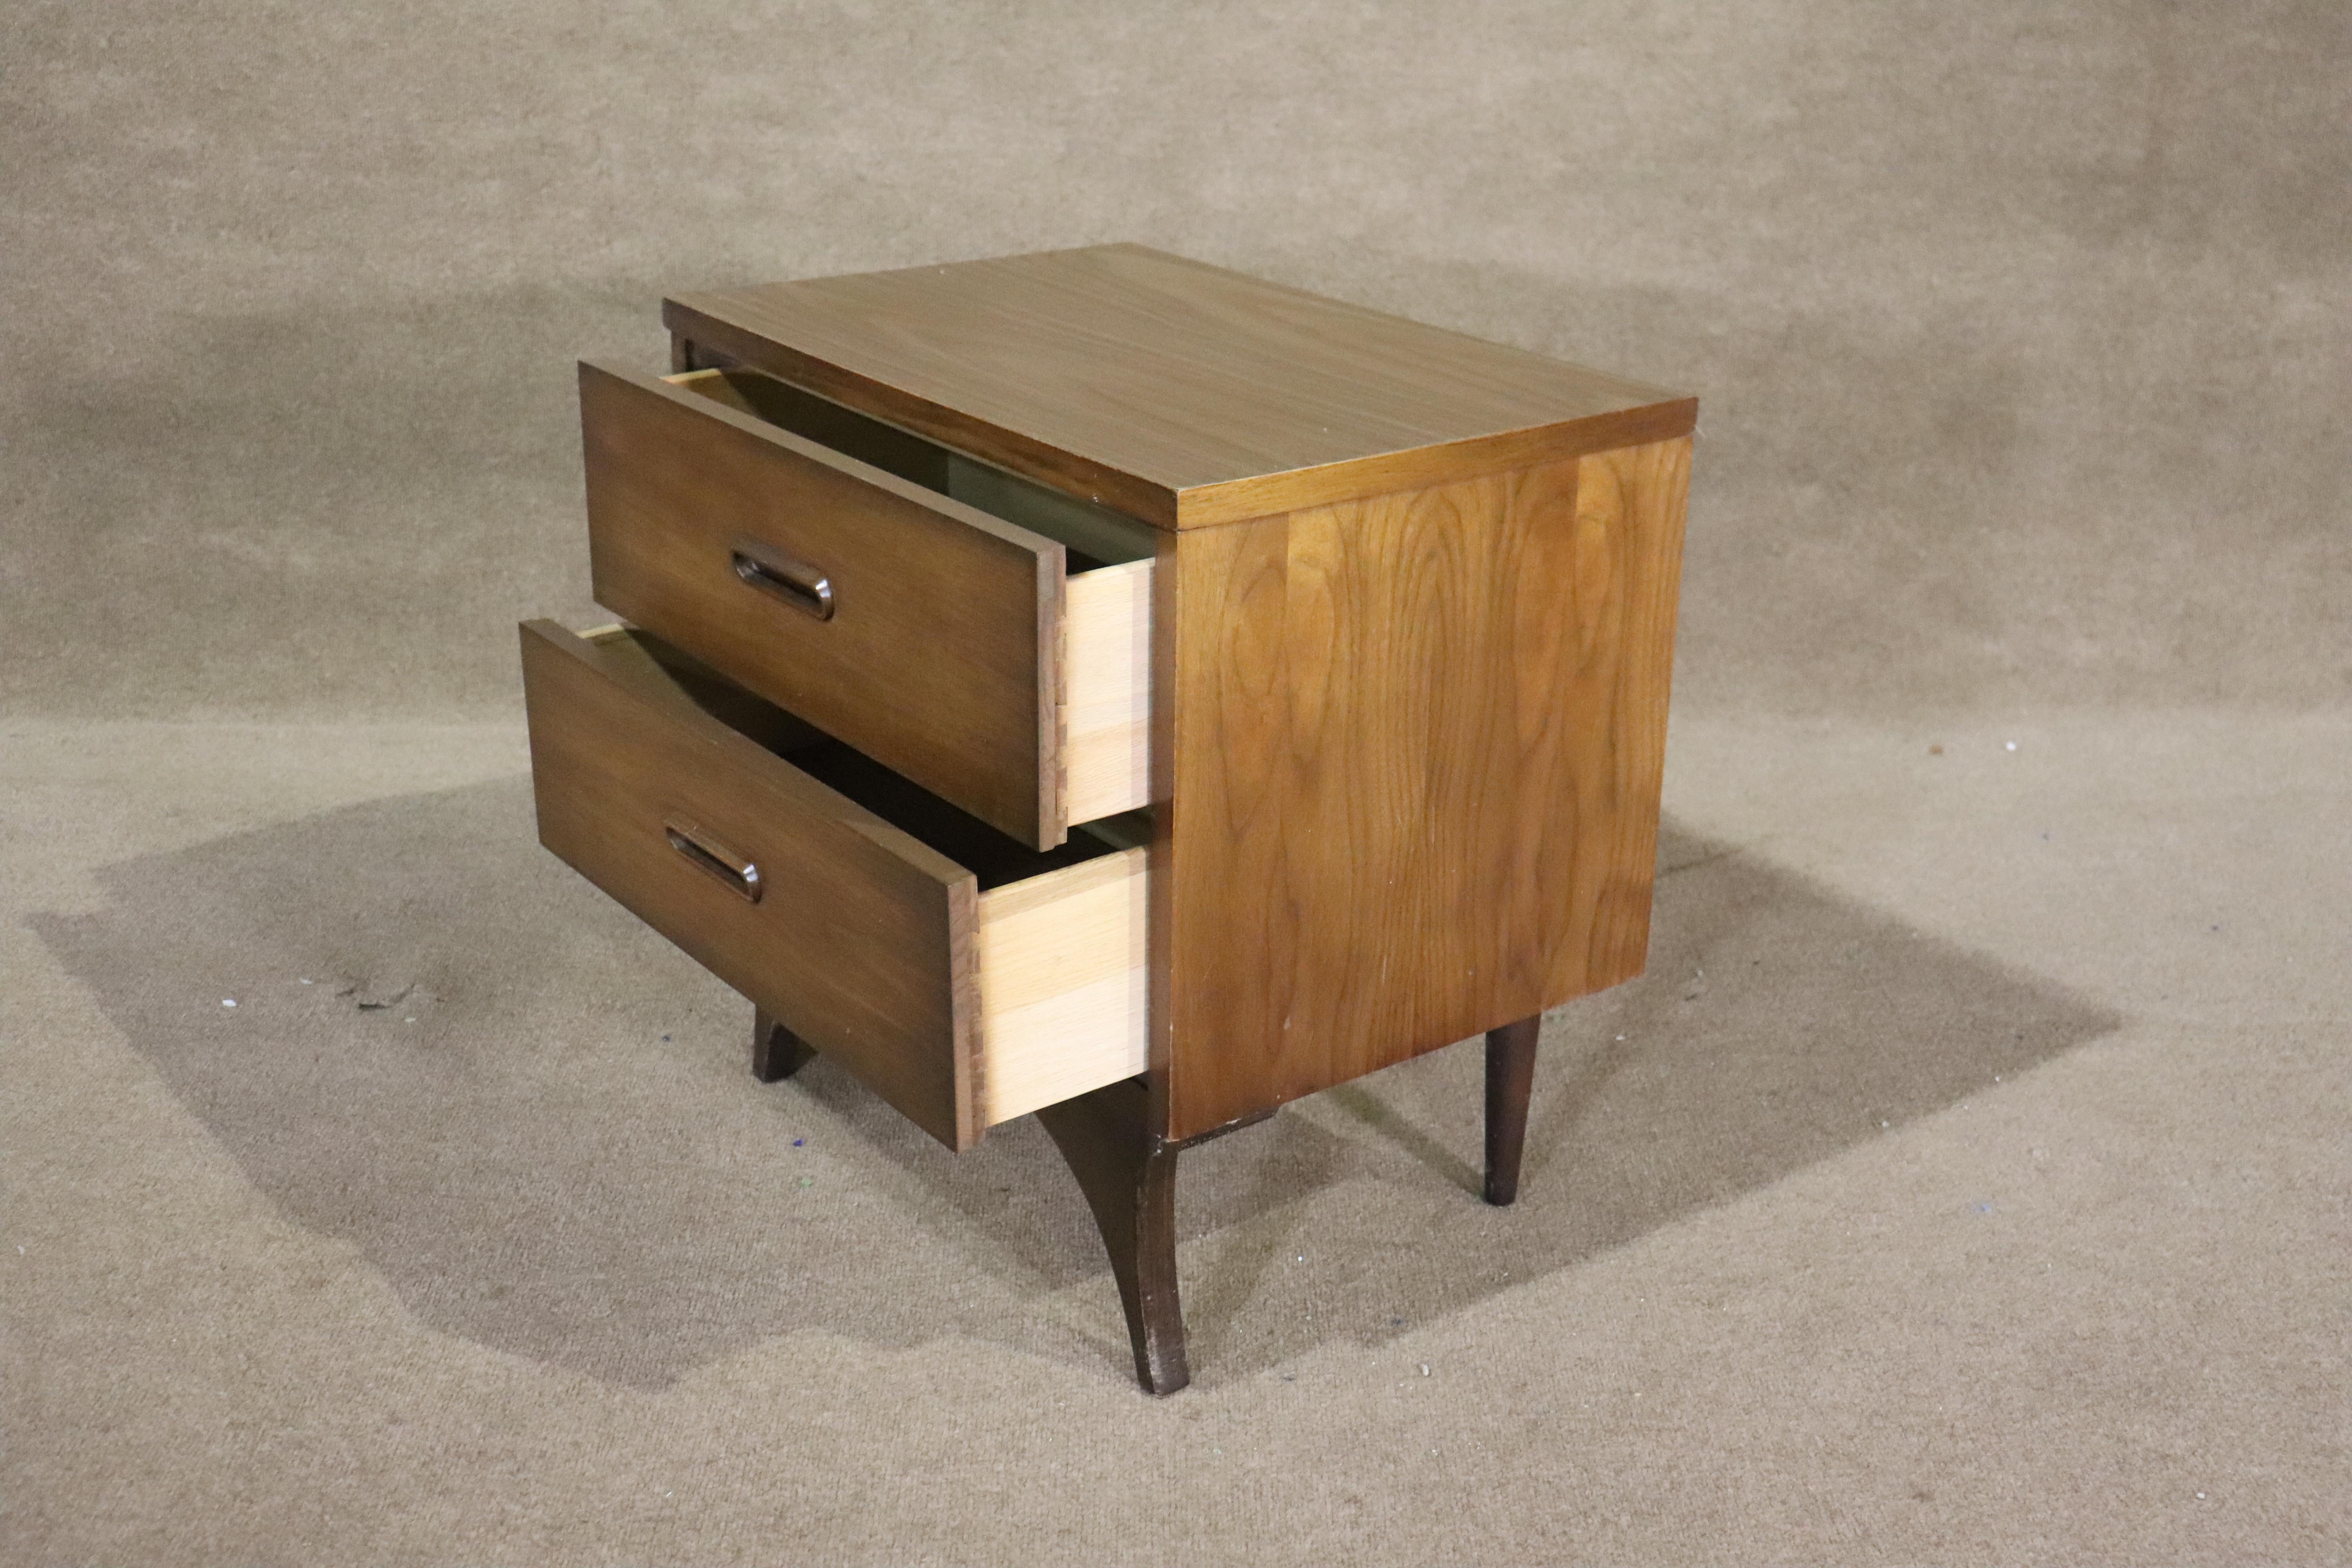 Mid-Century Modern end table with two drawers. Walnut grain table set on a sculpted wood base.
Please confirm location NY or NJ.